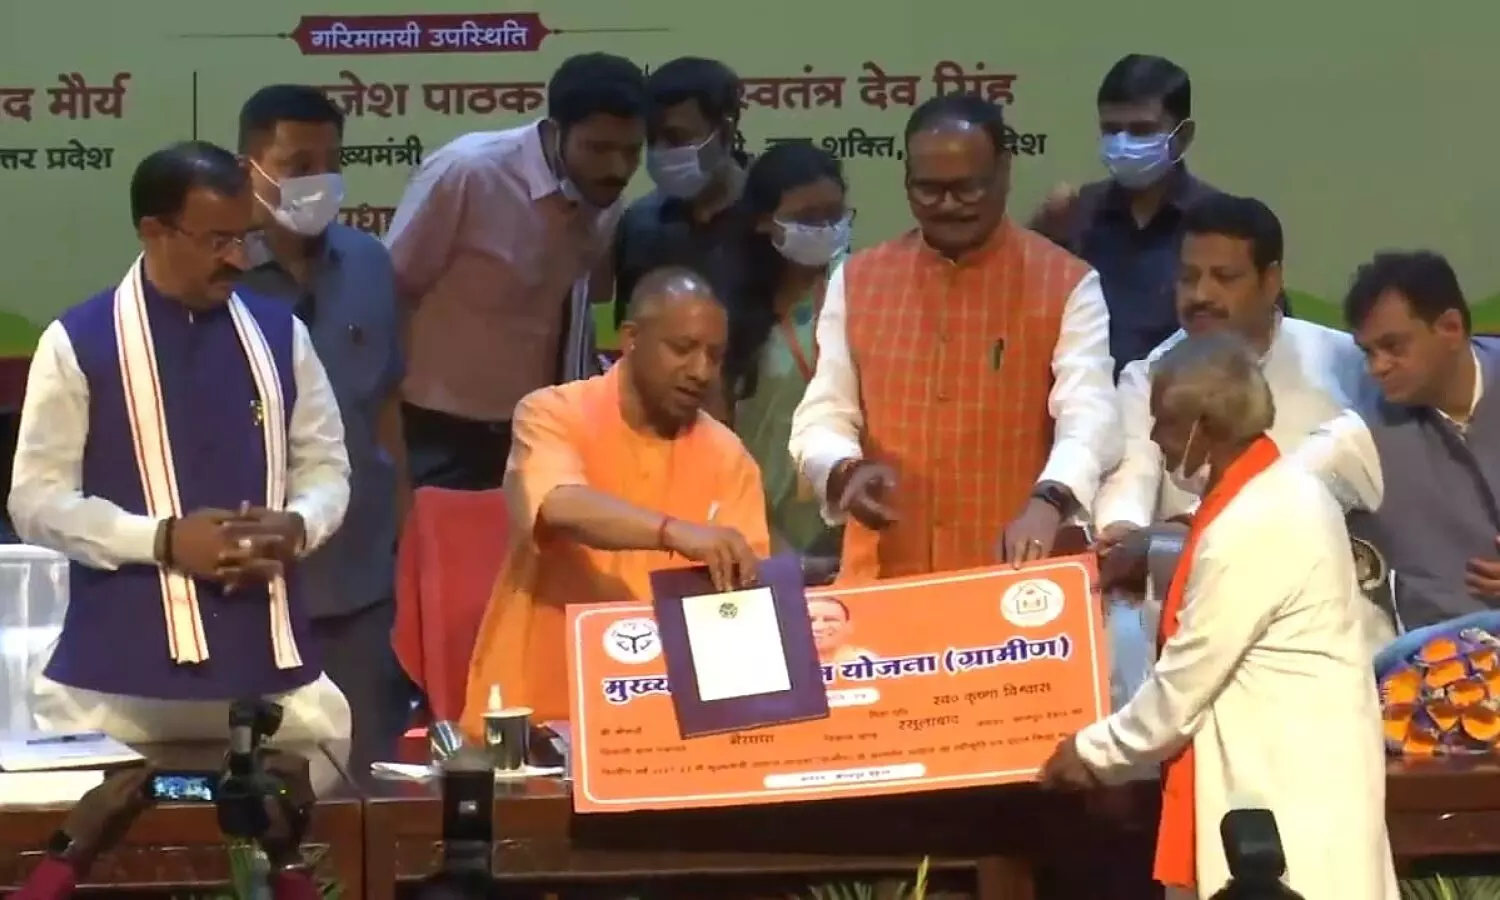 CM Yogi Adityanath gave the right to agricultural land and residential lease